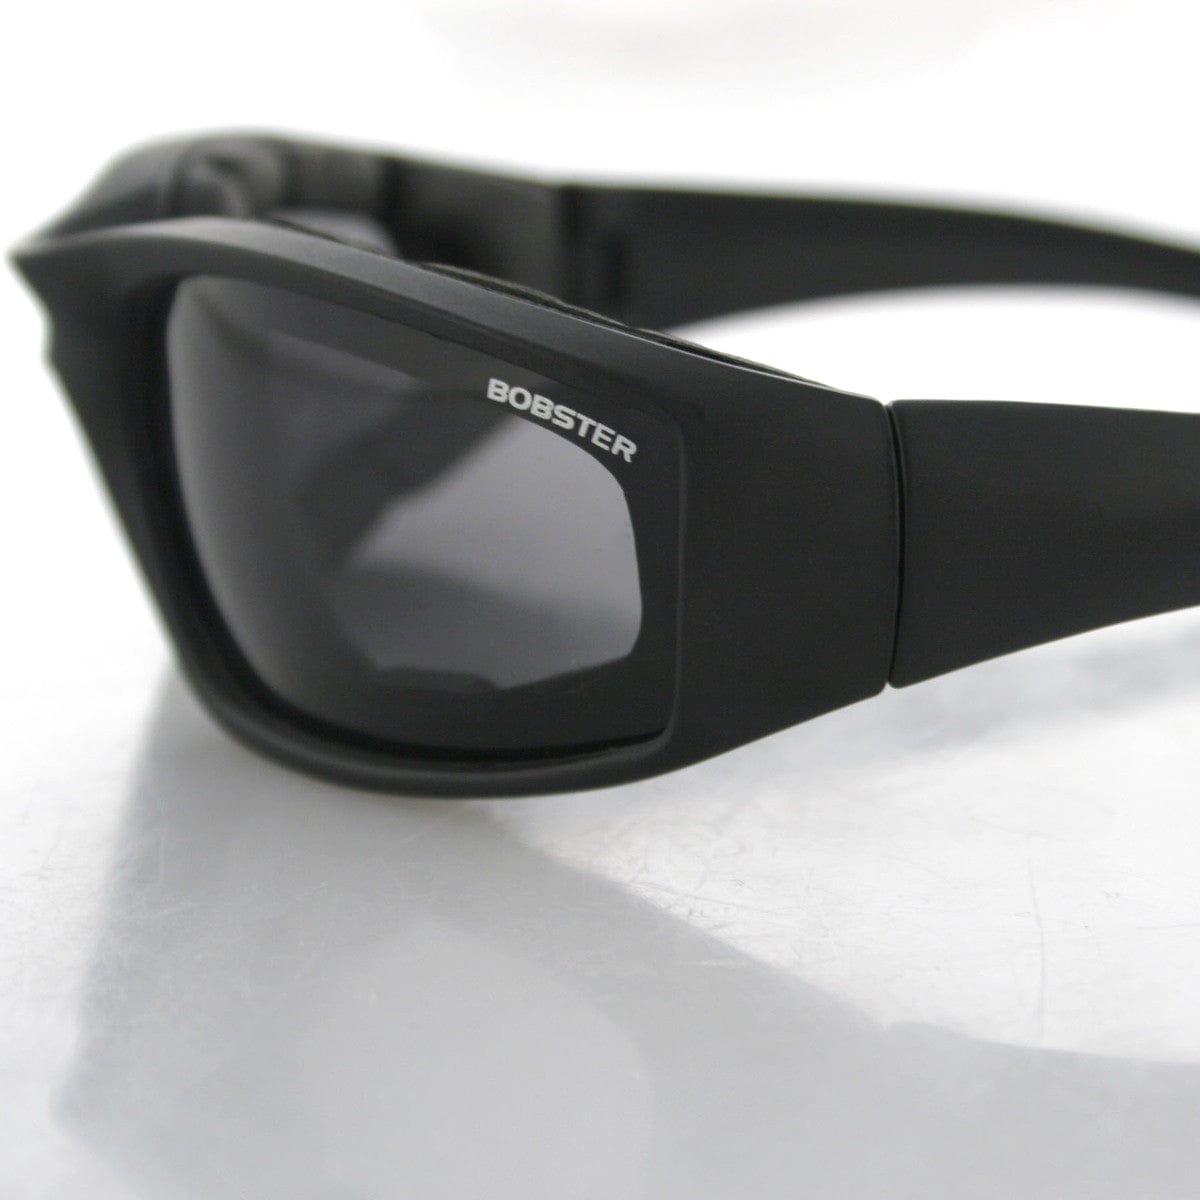 Bobster Foamerz 2 Safety Sunglasses Black Frame with Smoke Anti-Fog Lens Closeup View